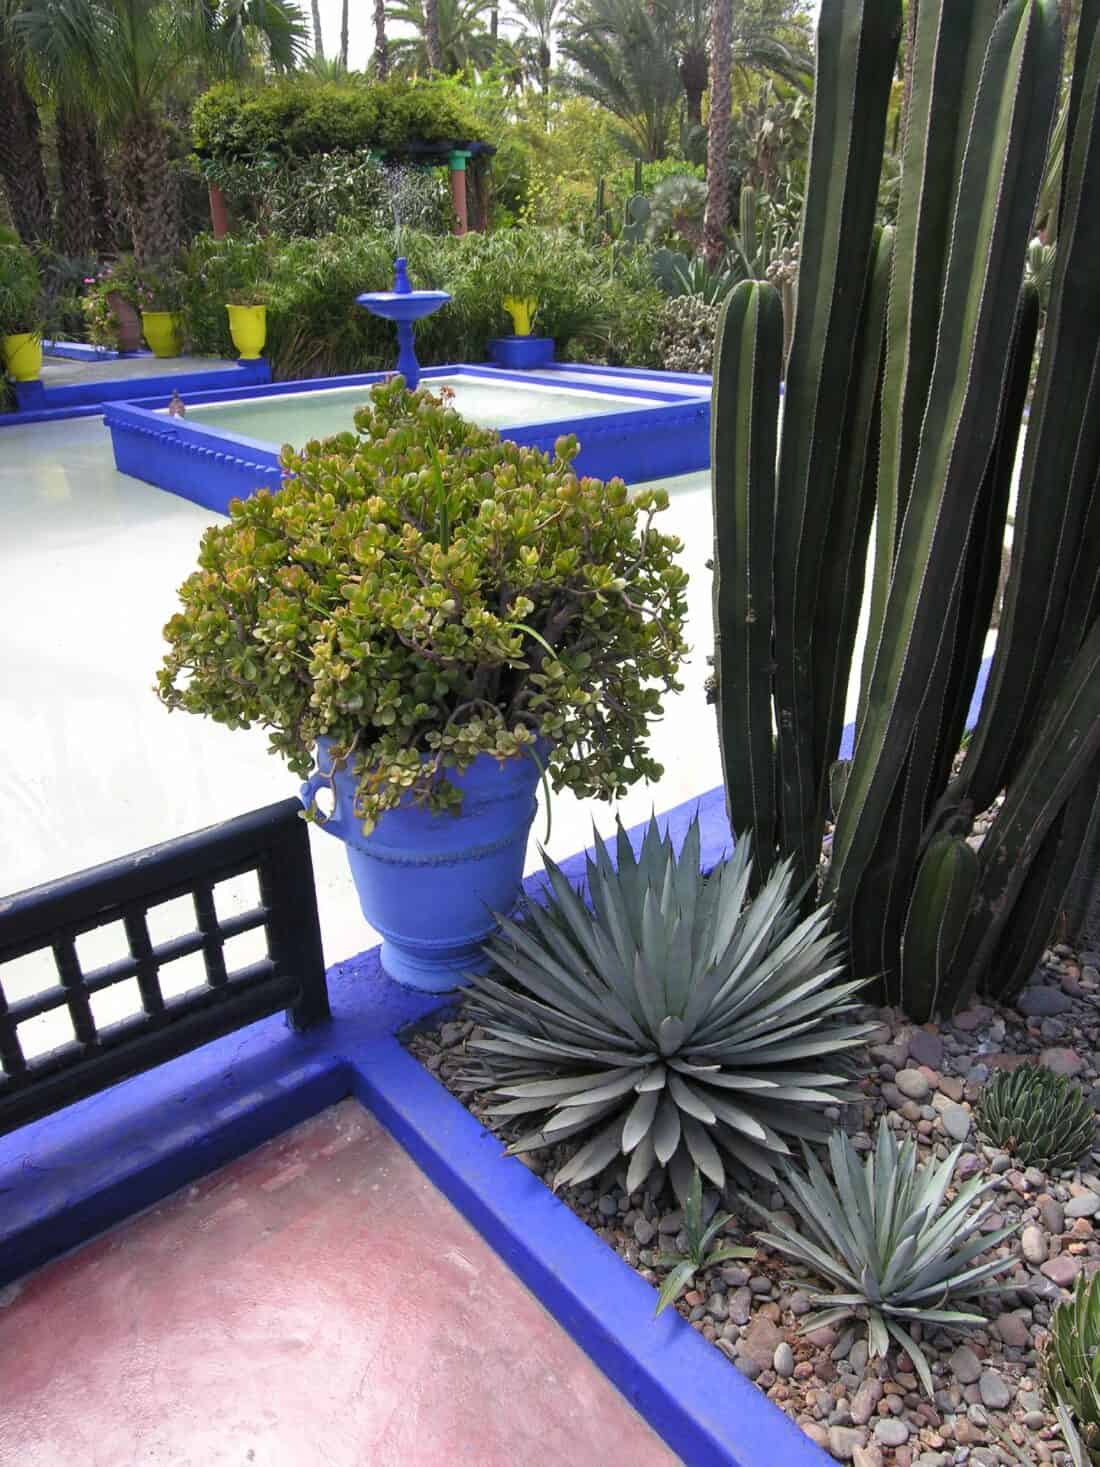 An ornamental Majorelle Garden with vibrant blue accents and a variety of cacti and succulent plants.